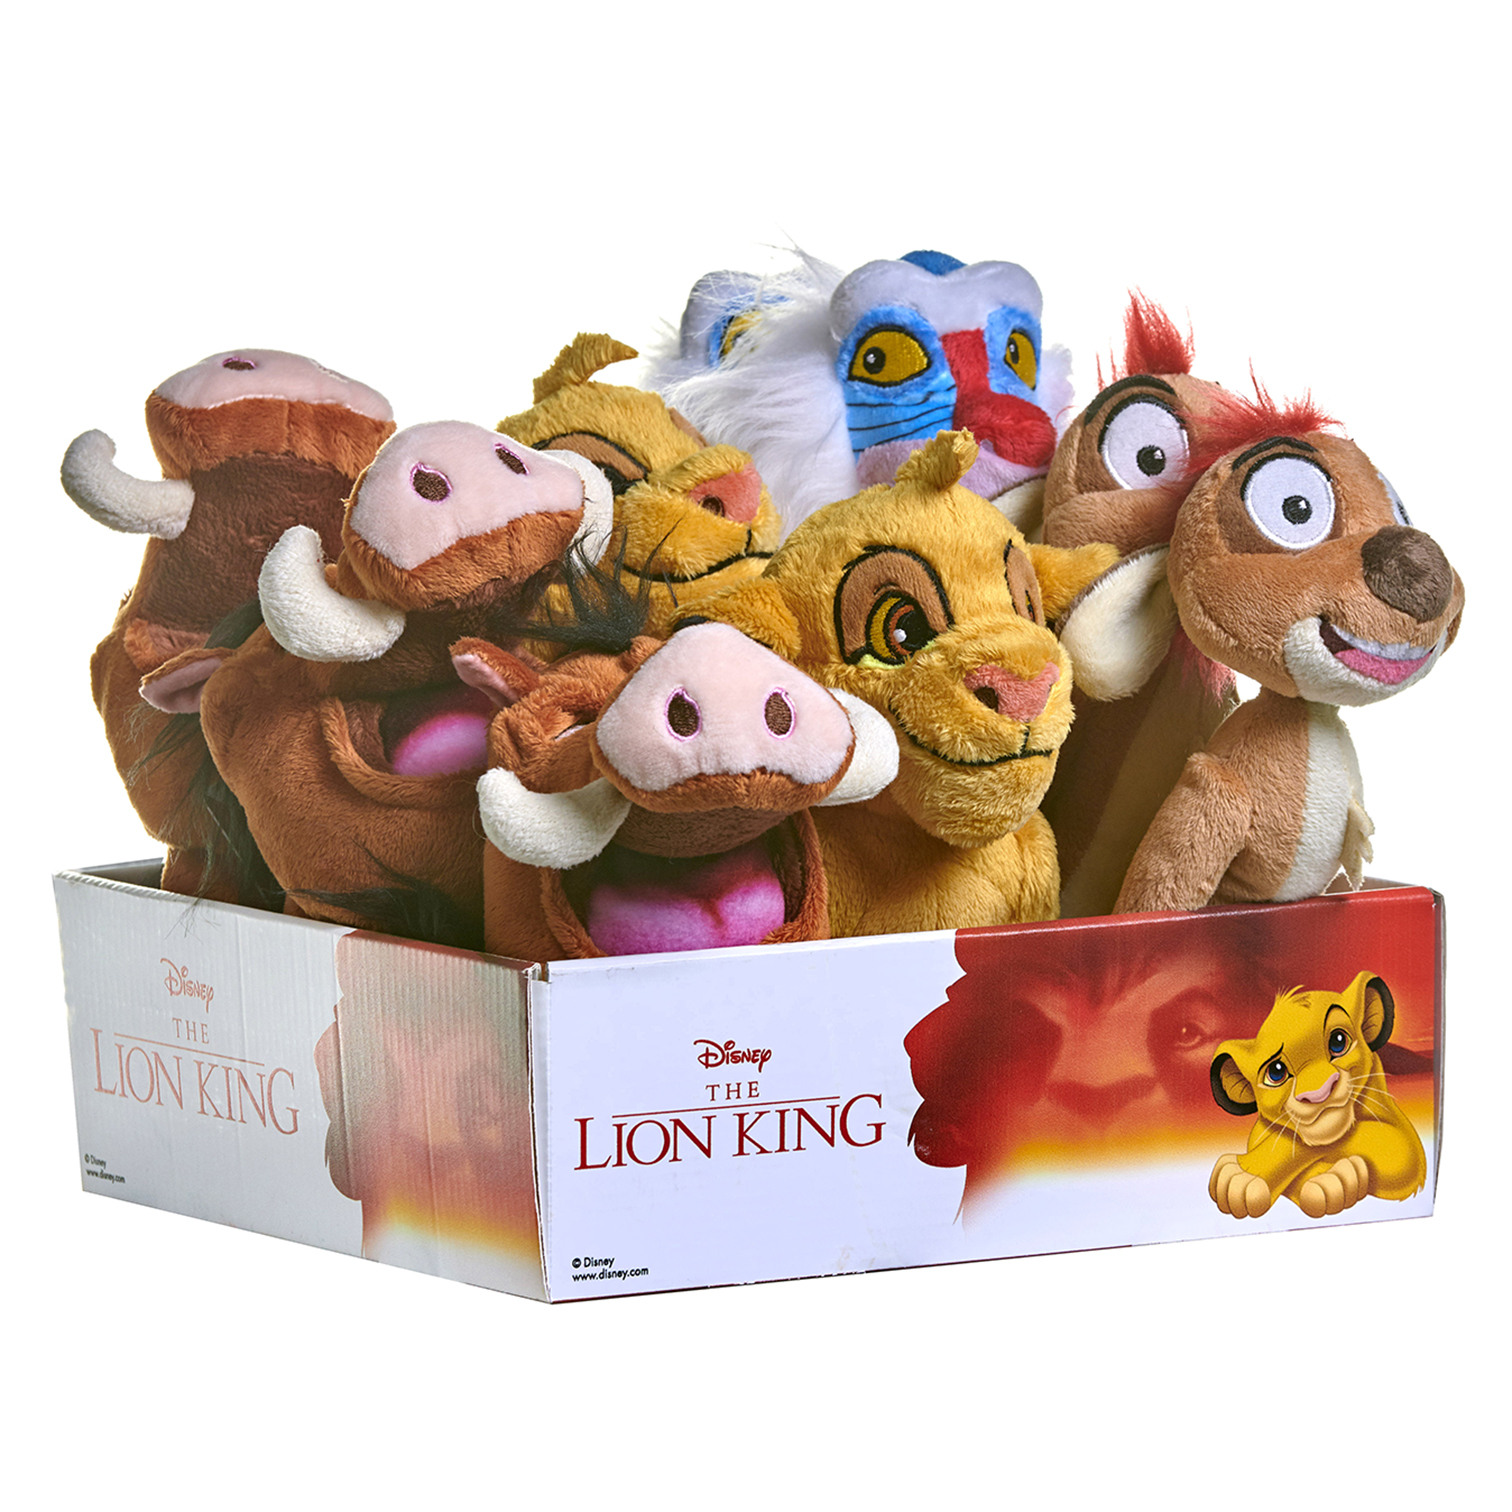 25cm Posh Paws 37128 The Lion King Adult Simba Soft Toy 